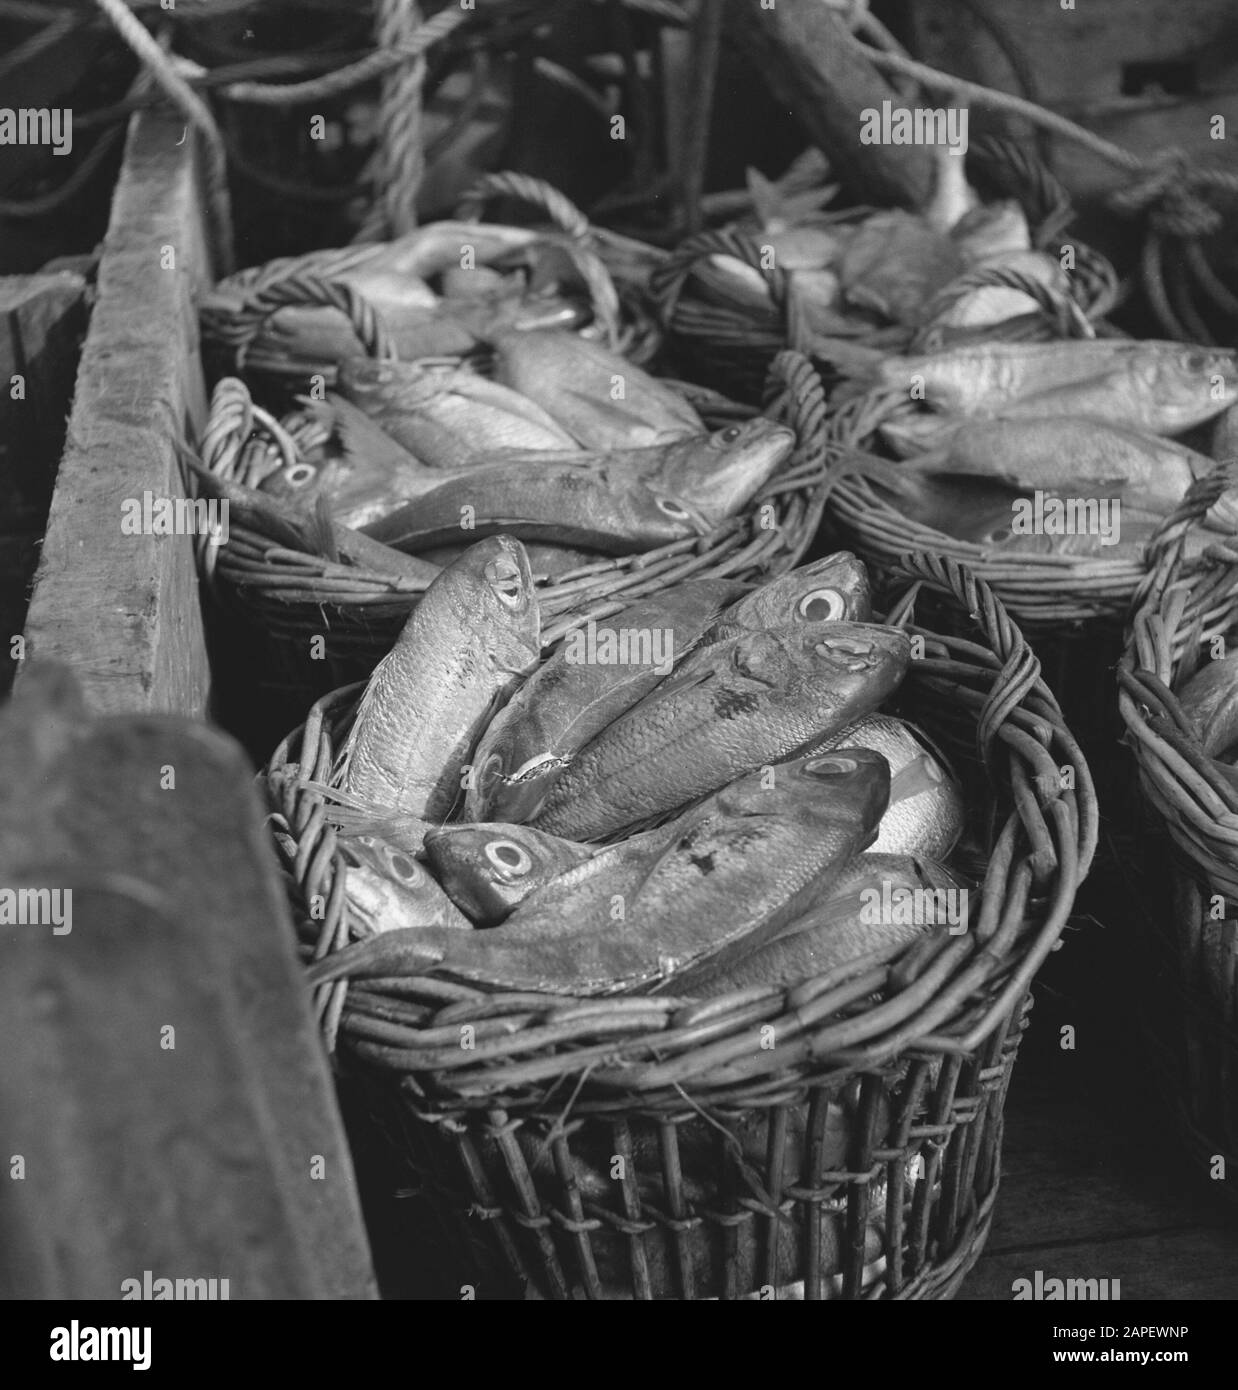 Fish baskets Black and White Stock Photos & Images - Alamy